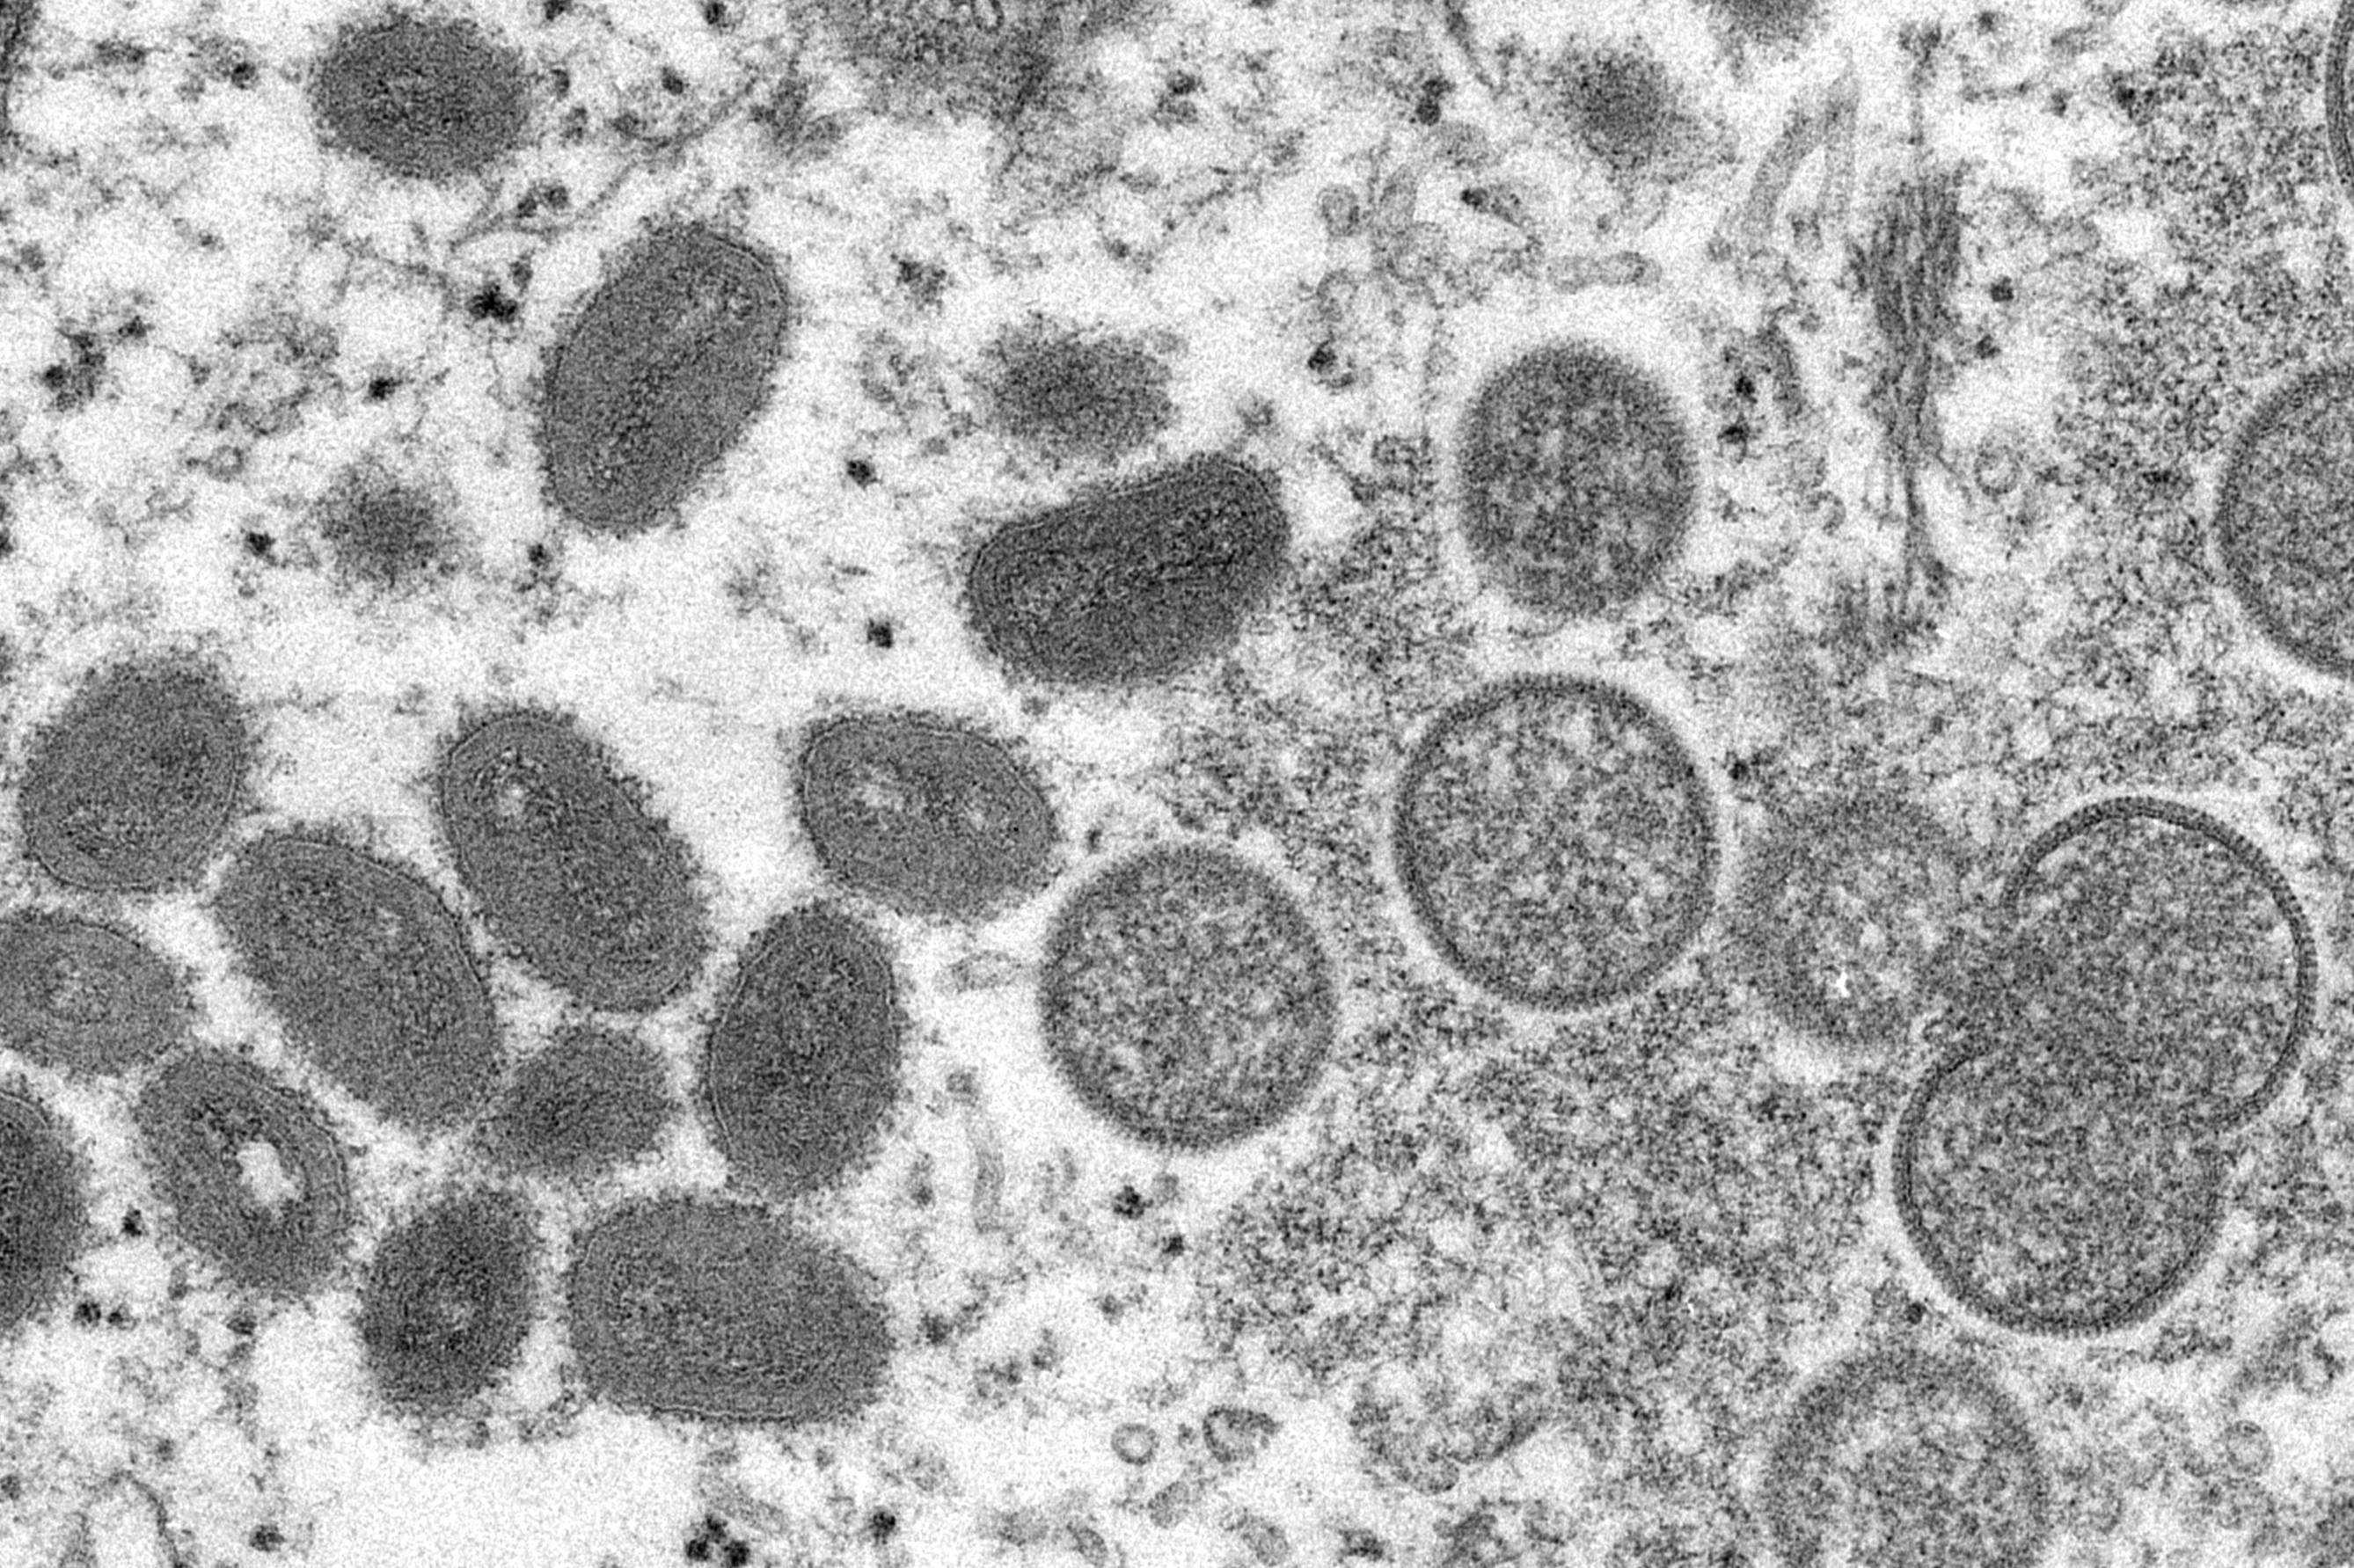 Israel Reports First Case of Monkeypox, Suspects Others – NBC Connecticut